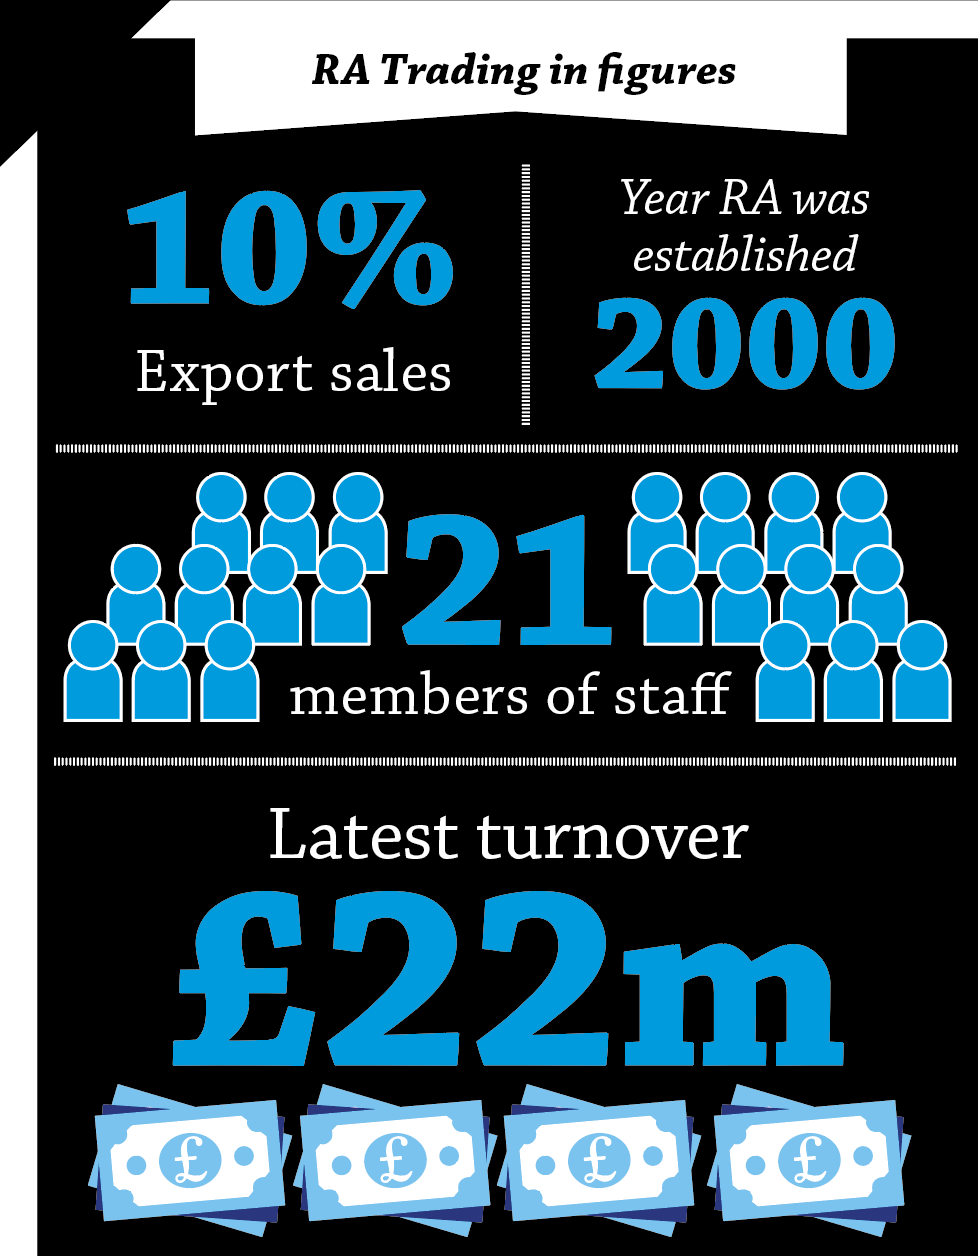 RA Trading in figures